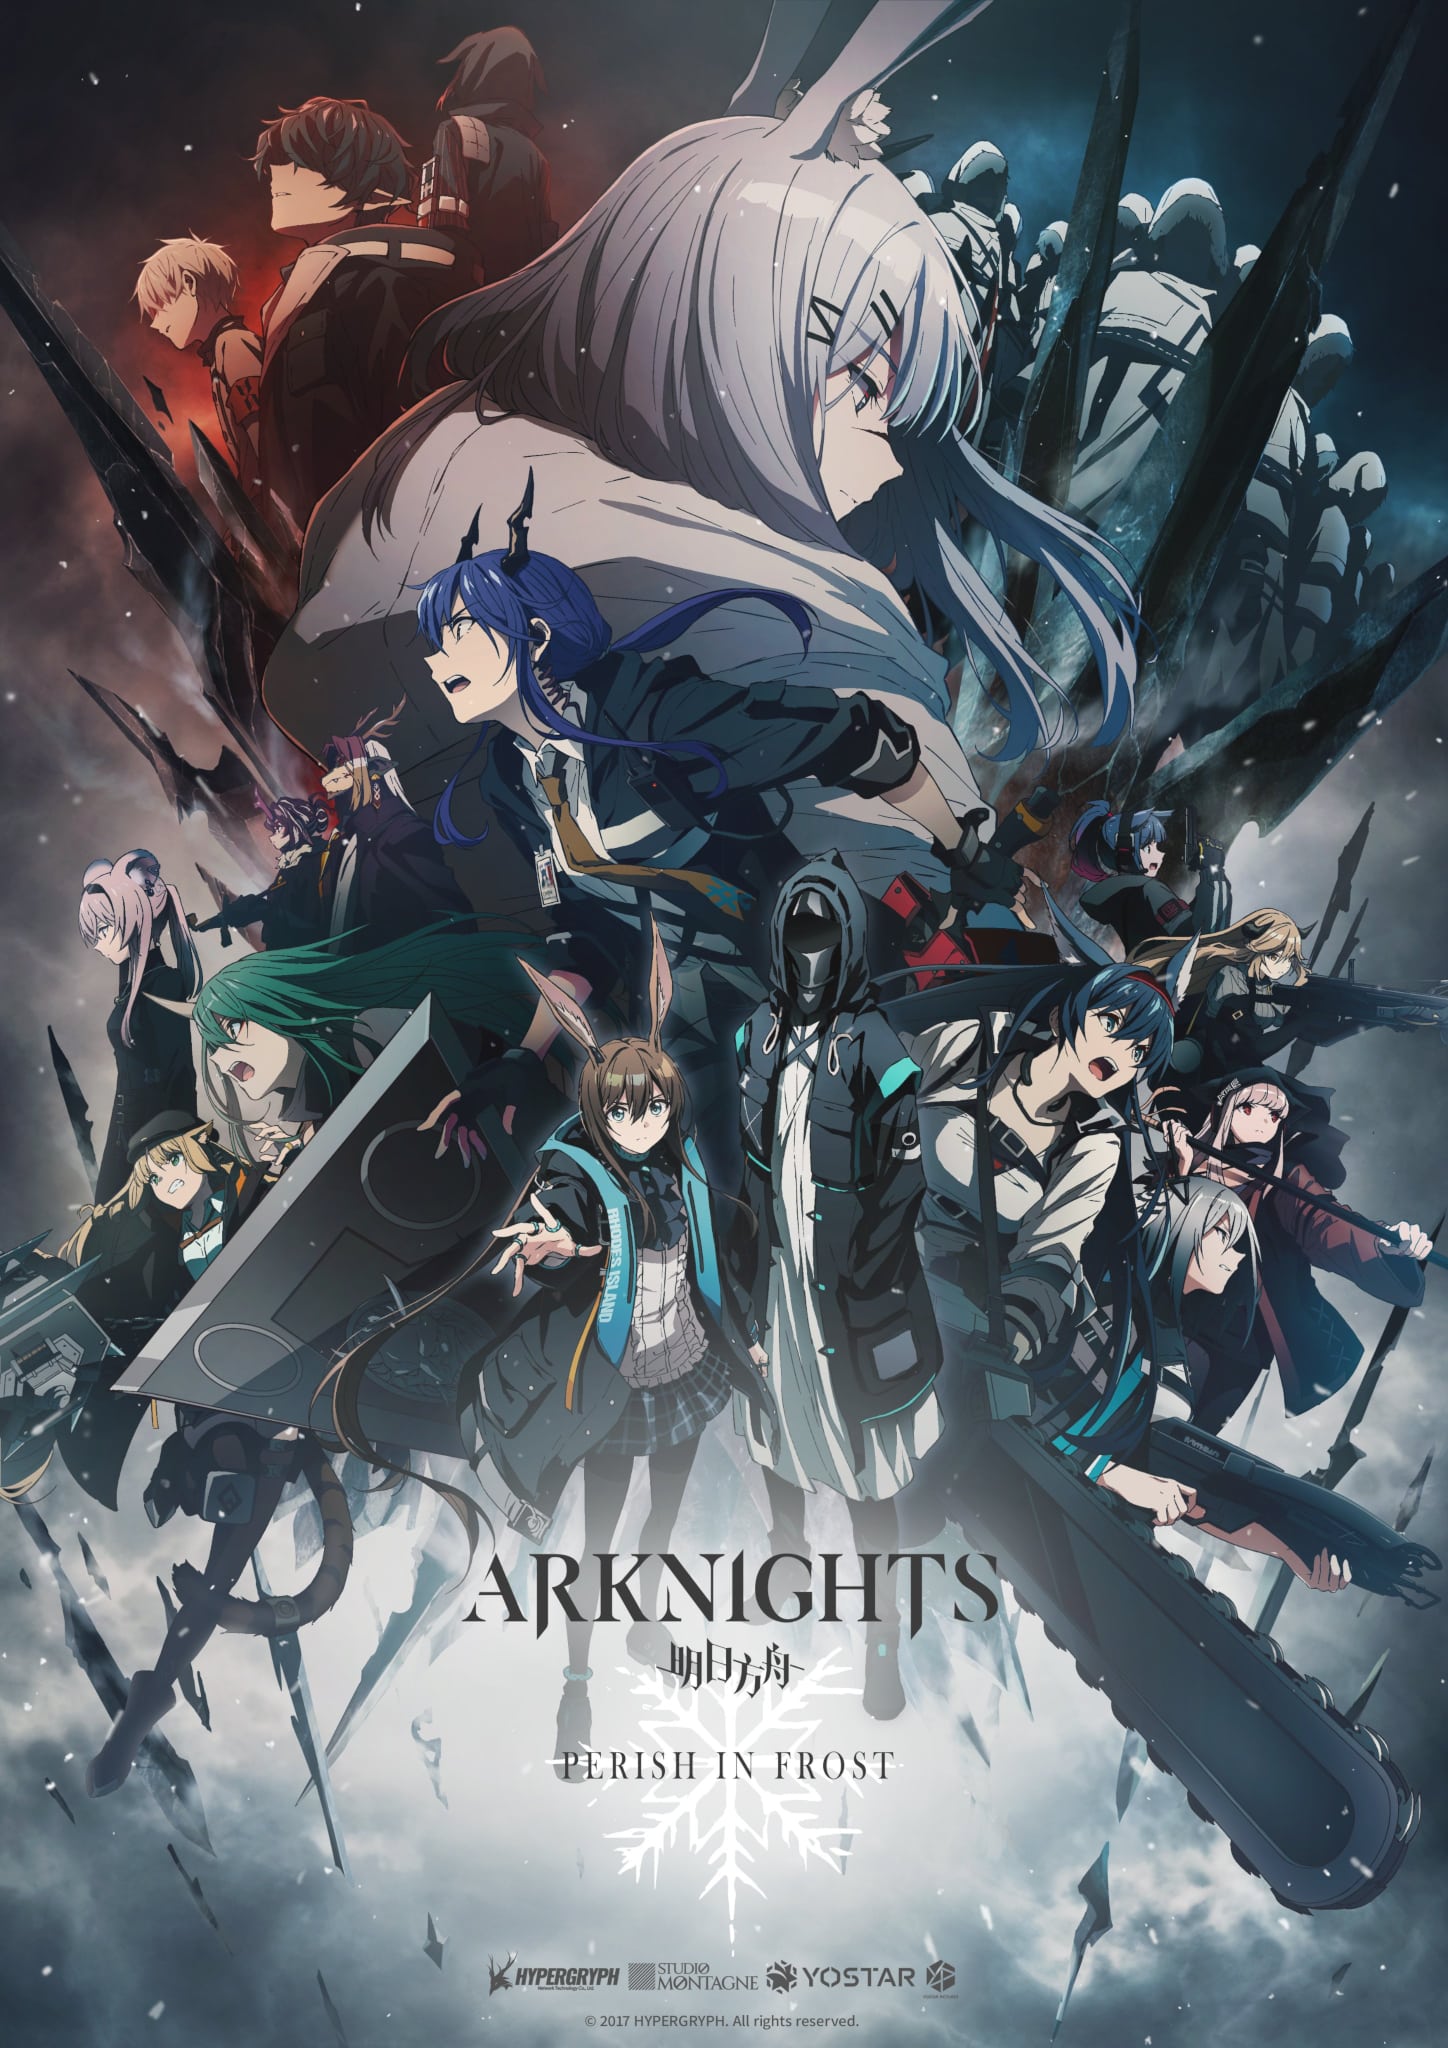 Second visuel pour lanime Arknights Saison 2 : Perish in Frost